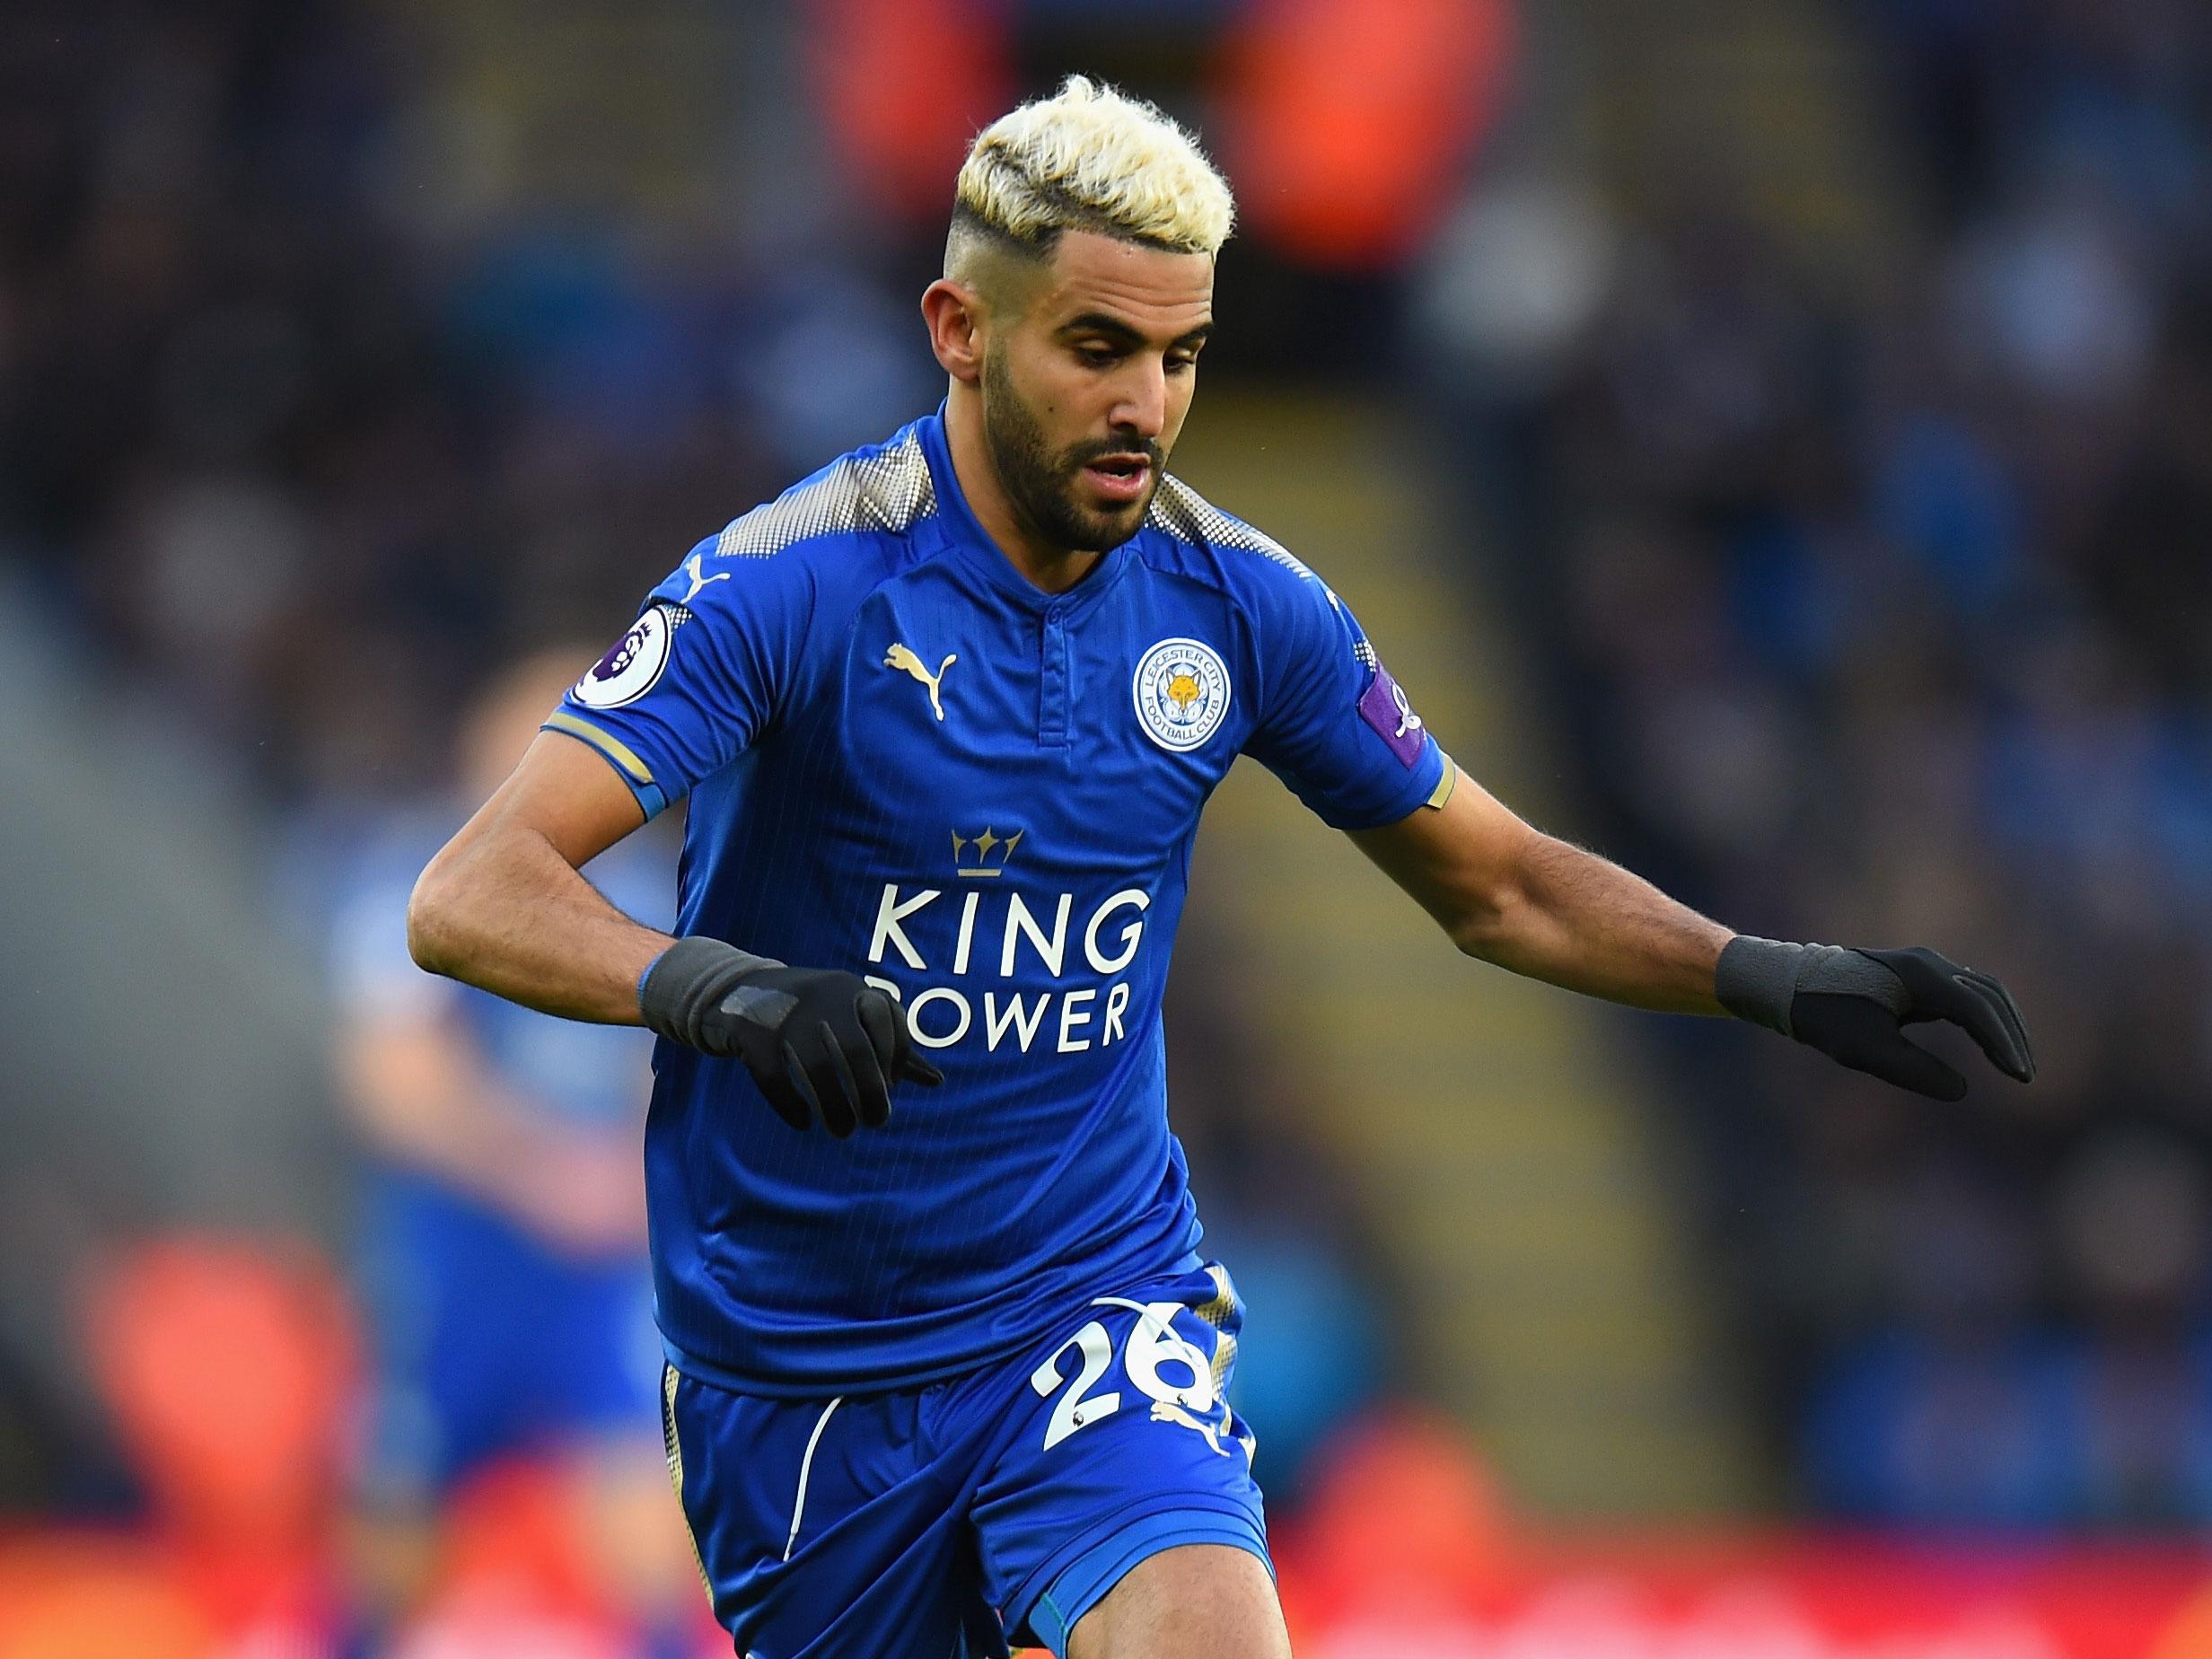 Mahrez will stay at Leicester until at least the summer